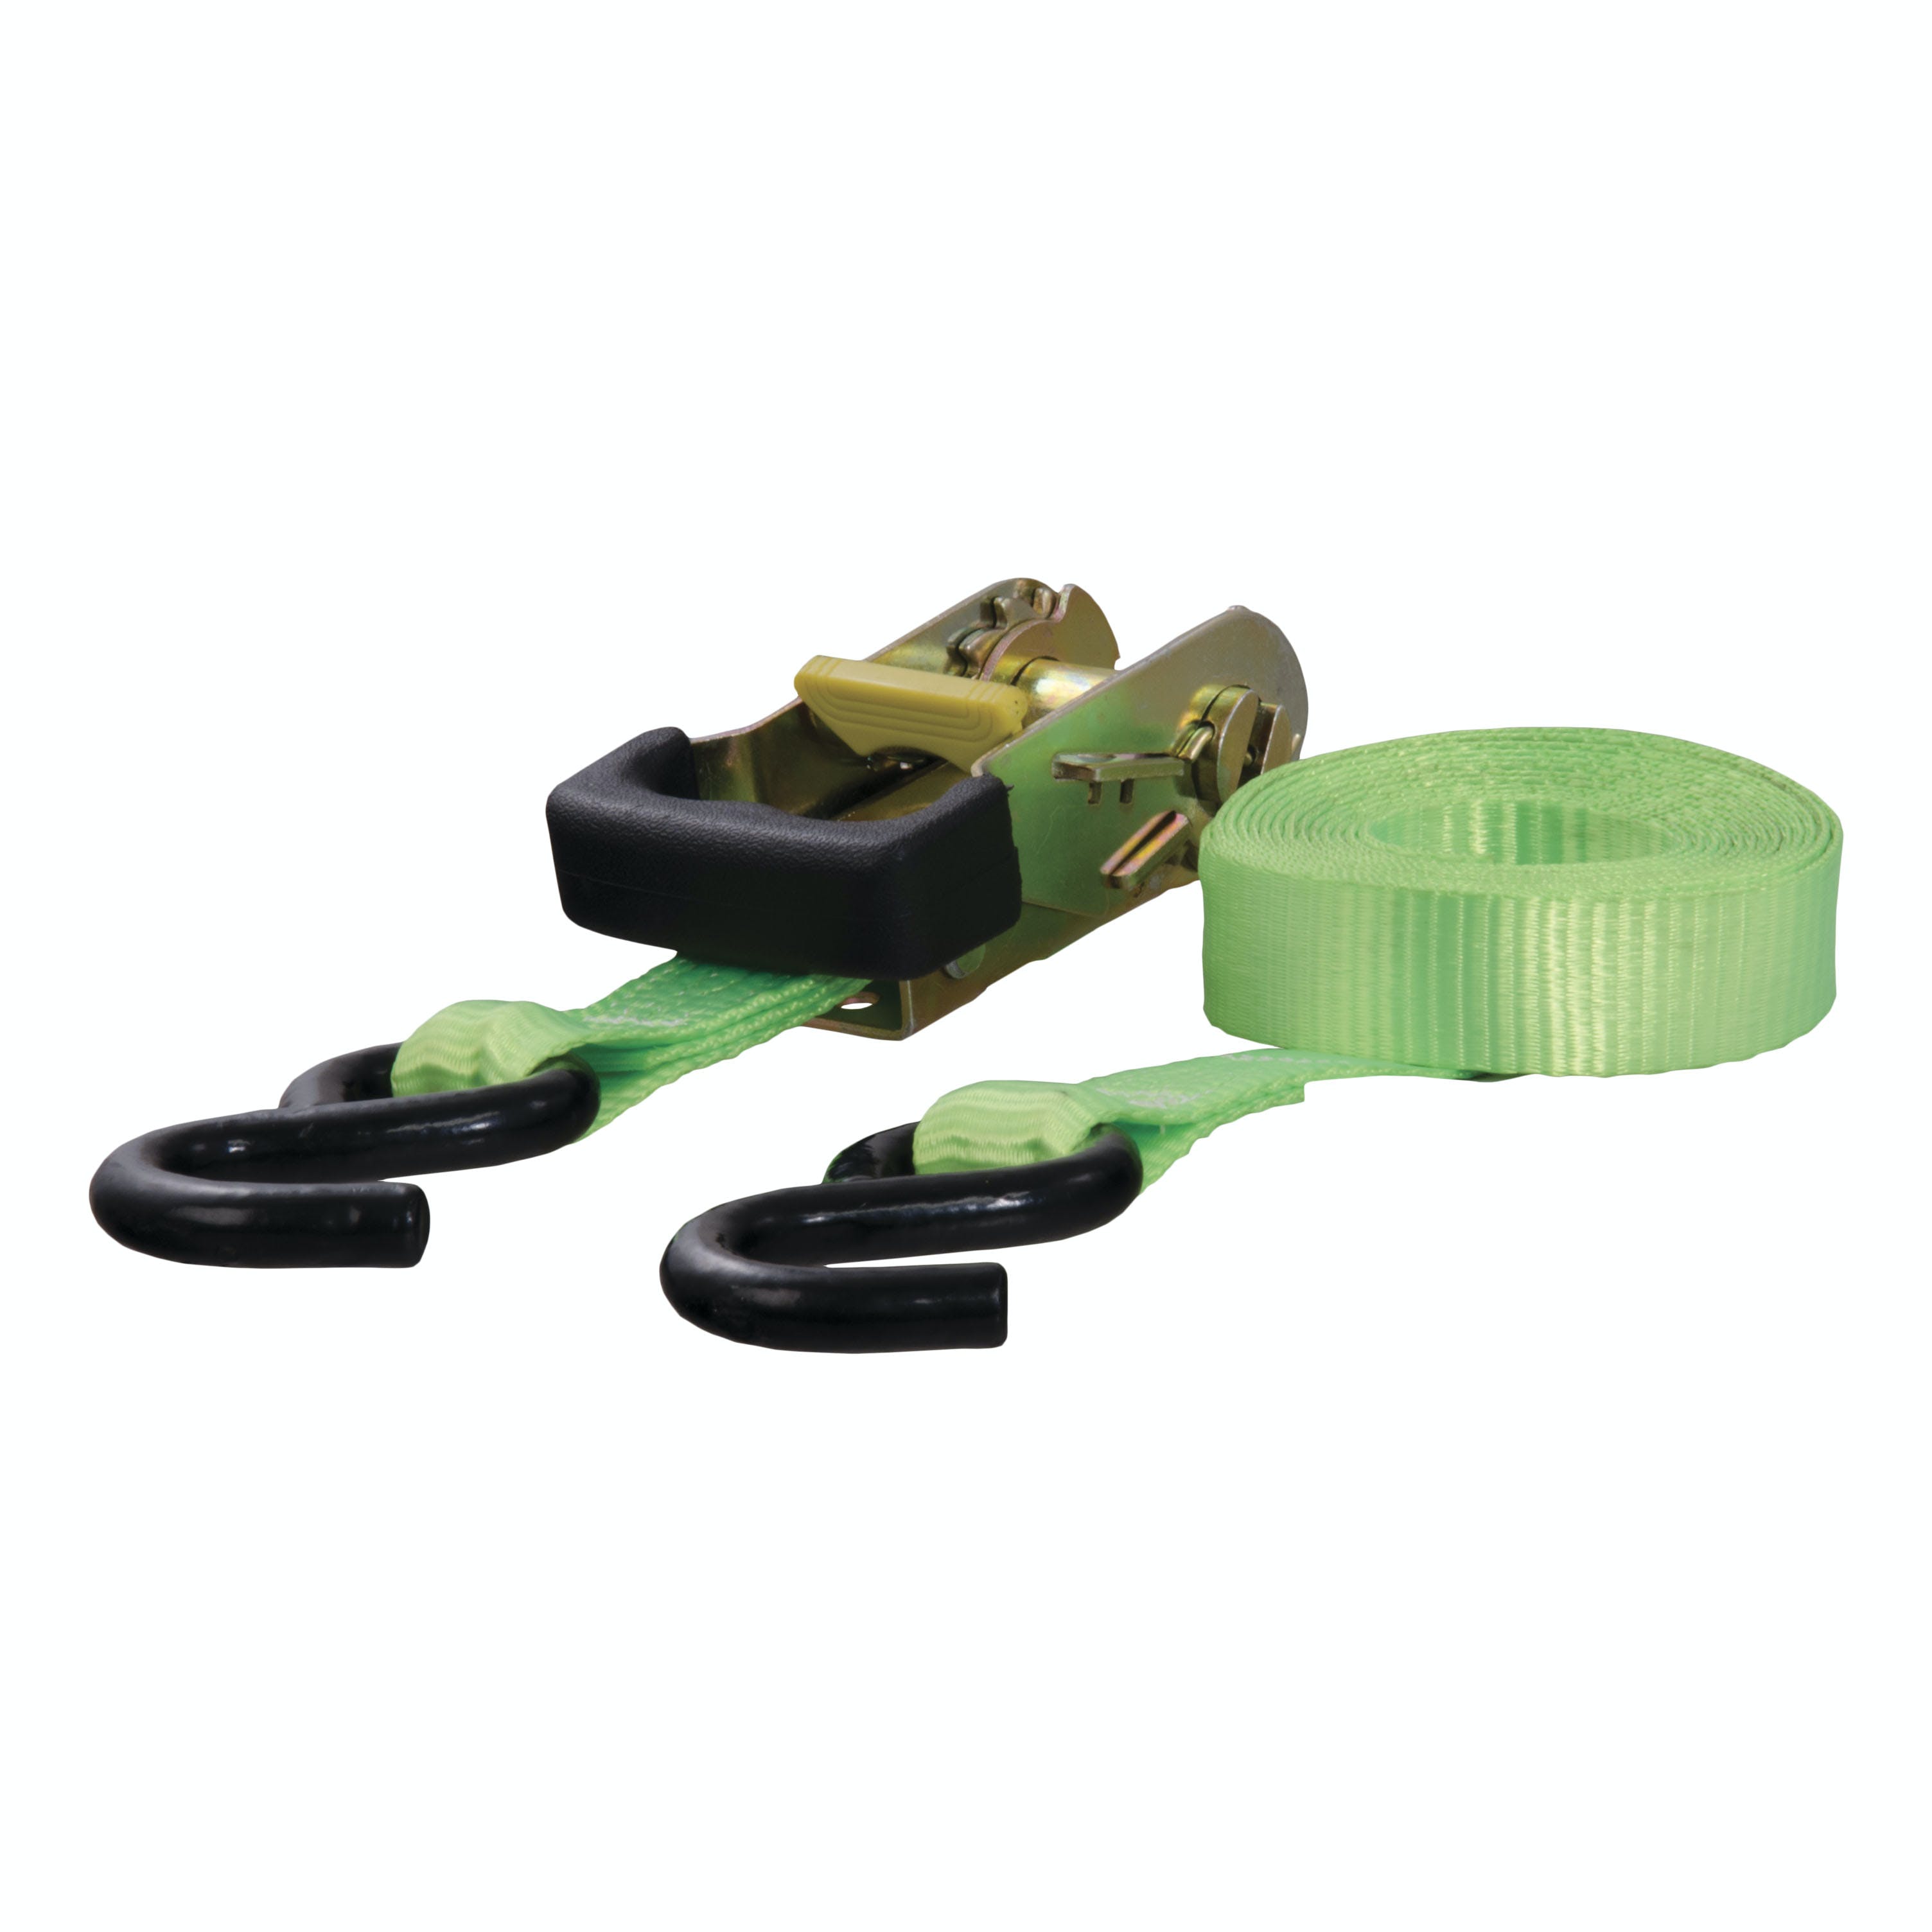 CURT 83027 16' Lime Green Cargo Strap with S-Hooks (1,100 lbs.)